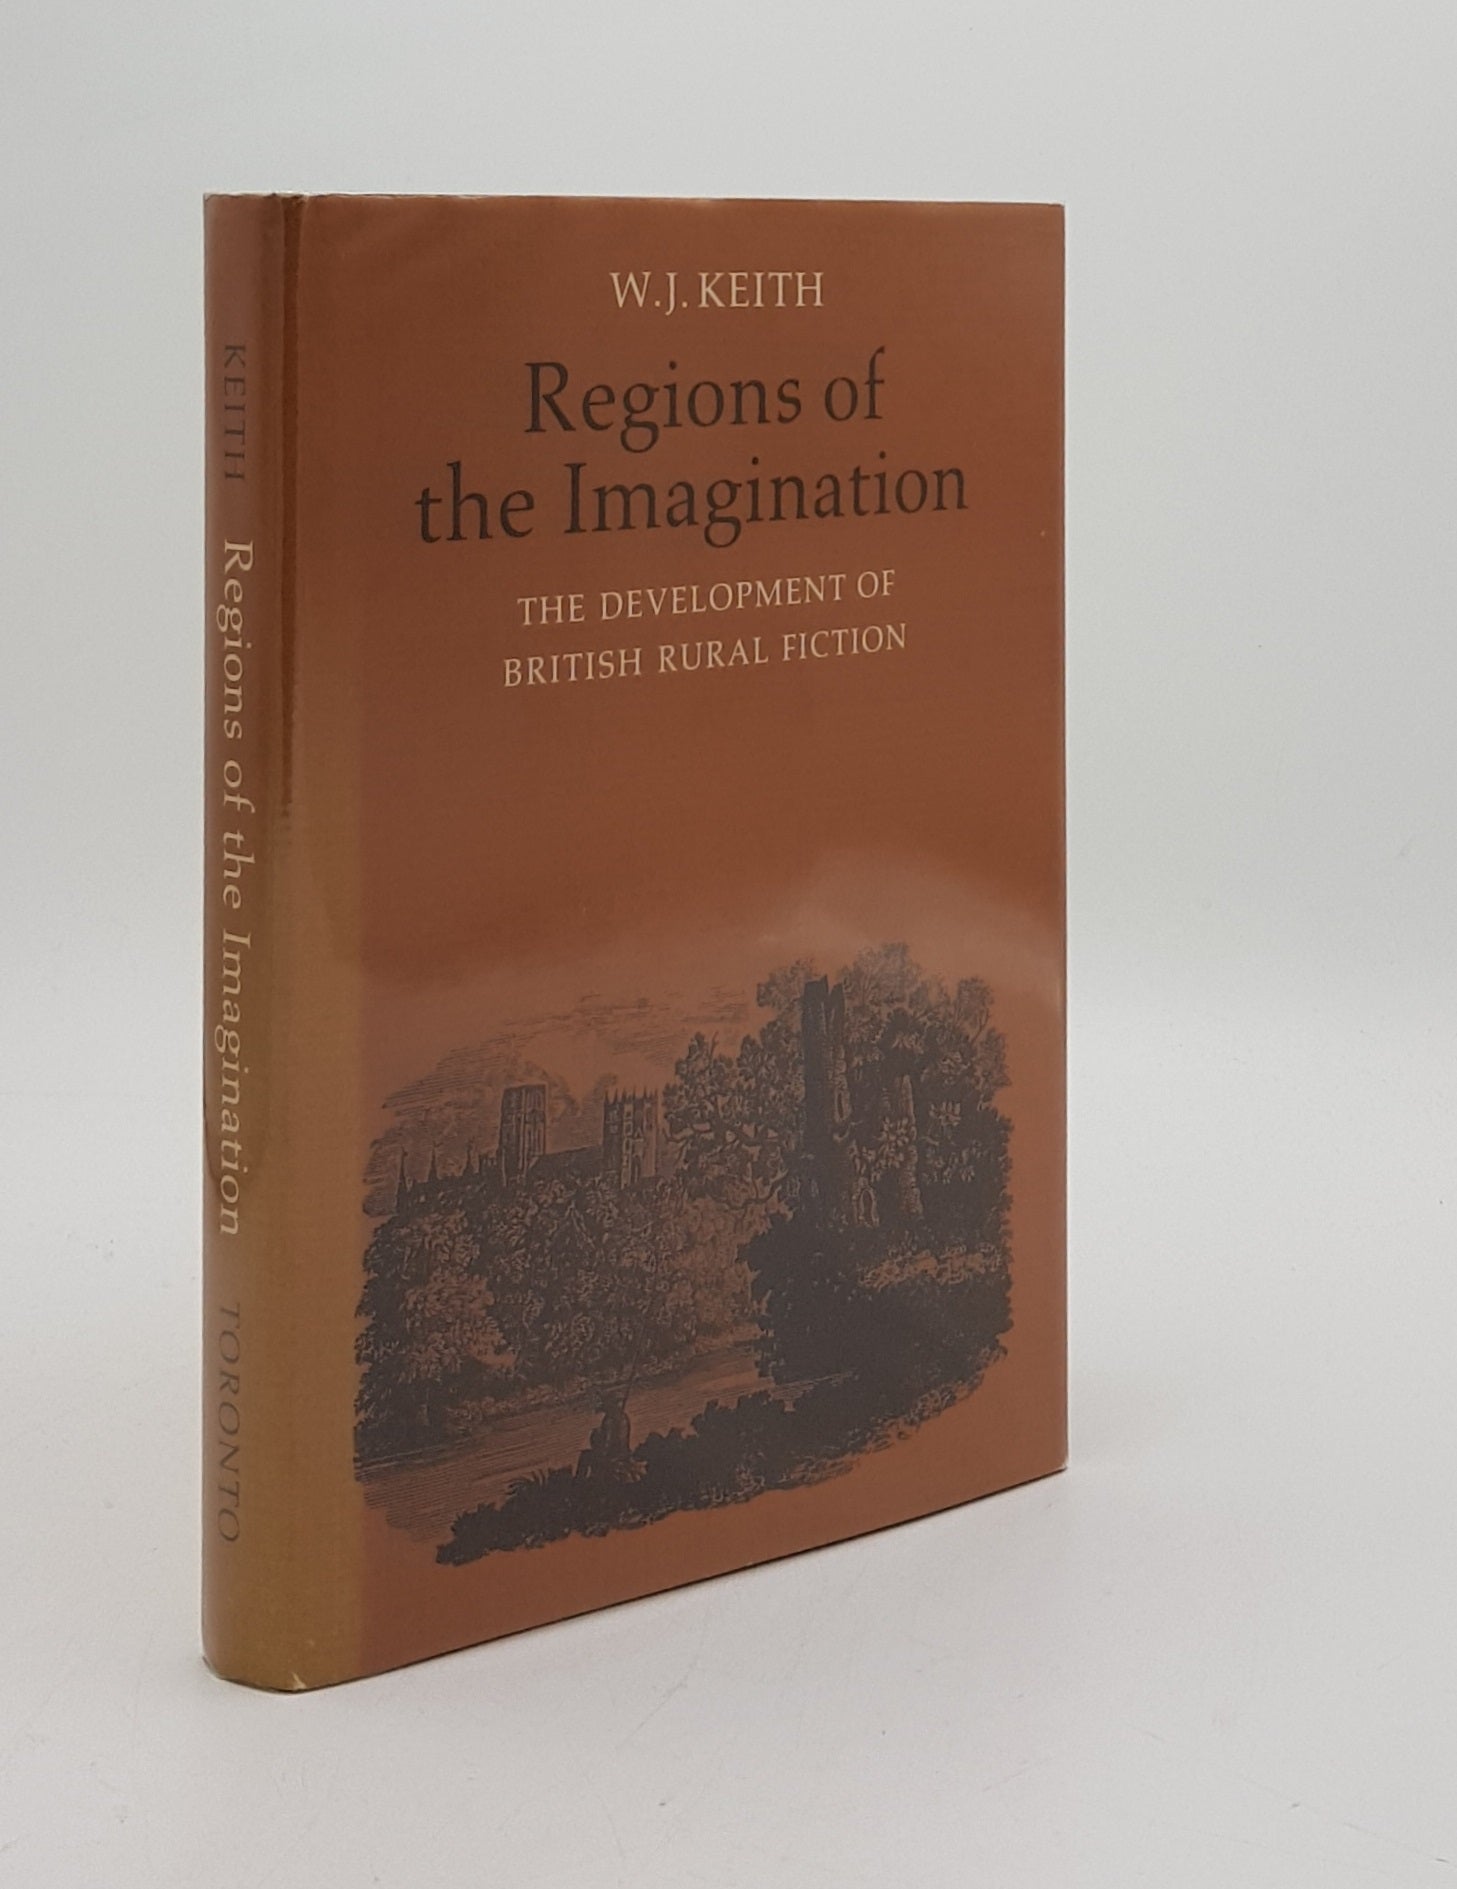 KEITH W.J. - Regions of the Imagination the Development of British Rural Fiction